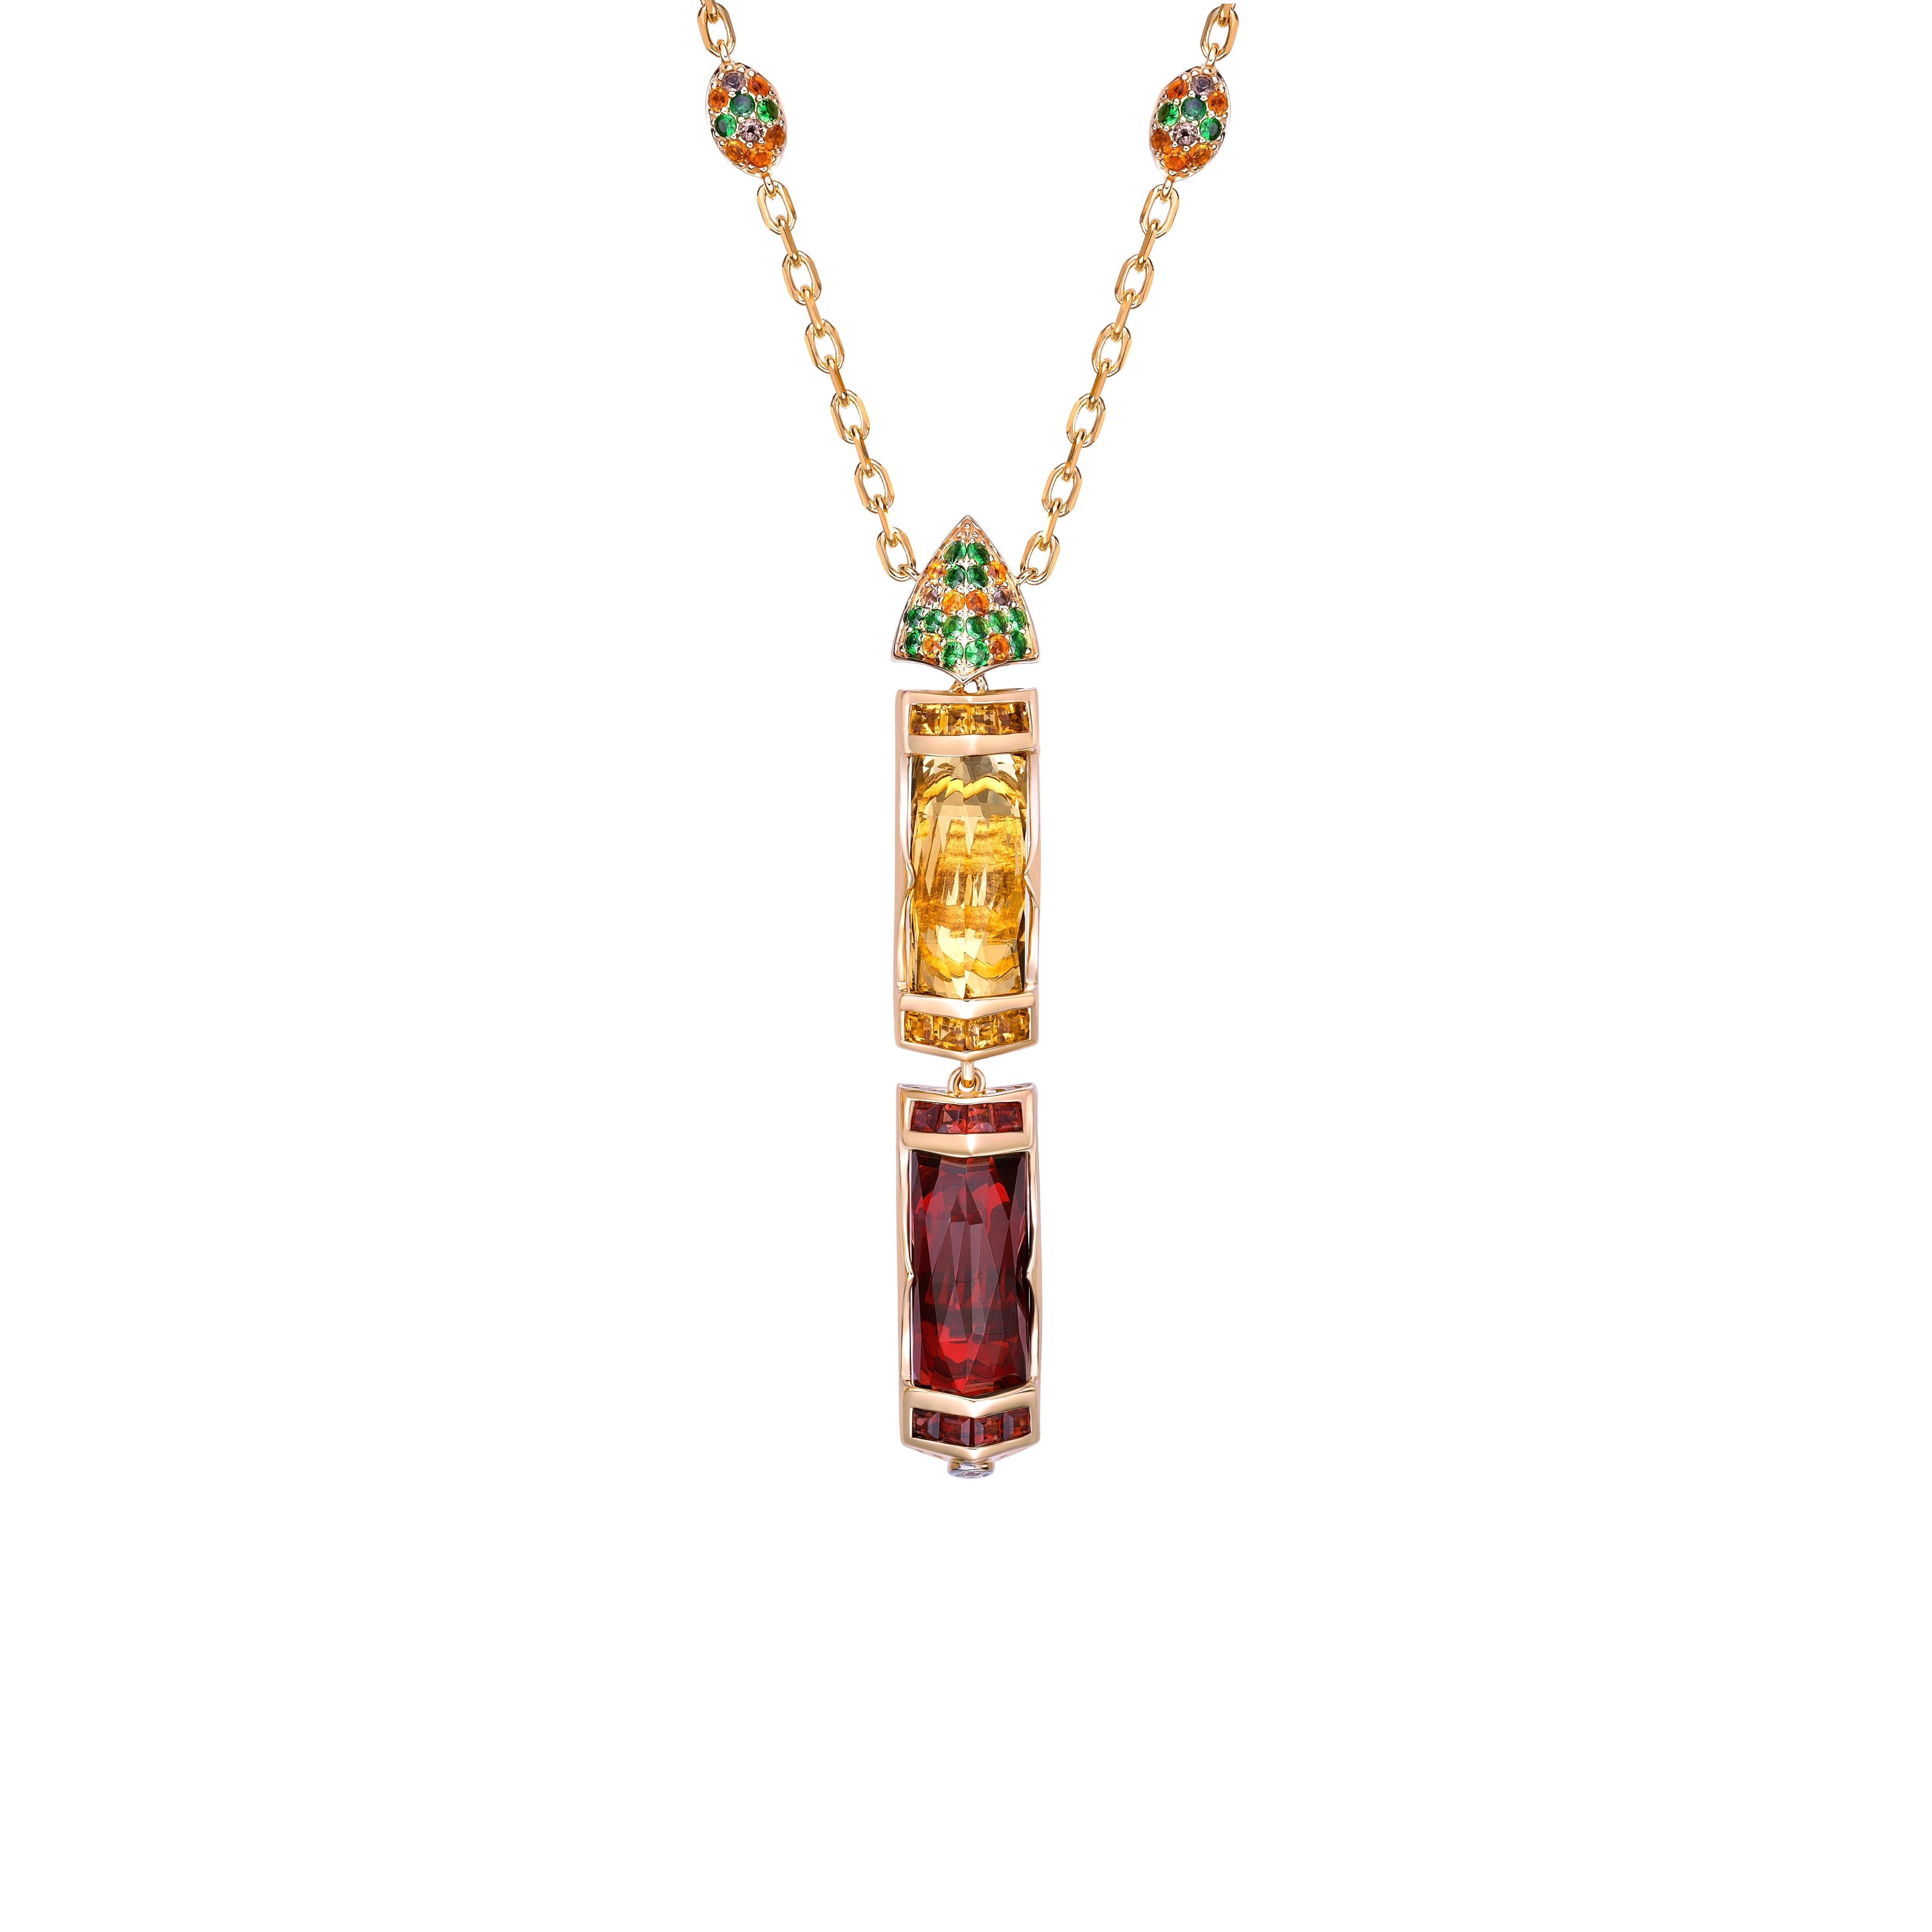 Presented A lovely Pendant of Garnet and Honey Quartz is perfect for people who want to wear it to any occasion or celebration. Tsavorite citrine, smoky quartz and tsavorite embellishments on Top add to the pendant artistic and beautiful design.